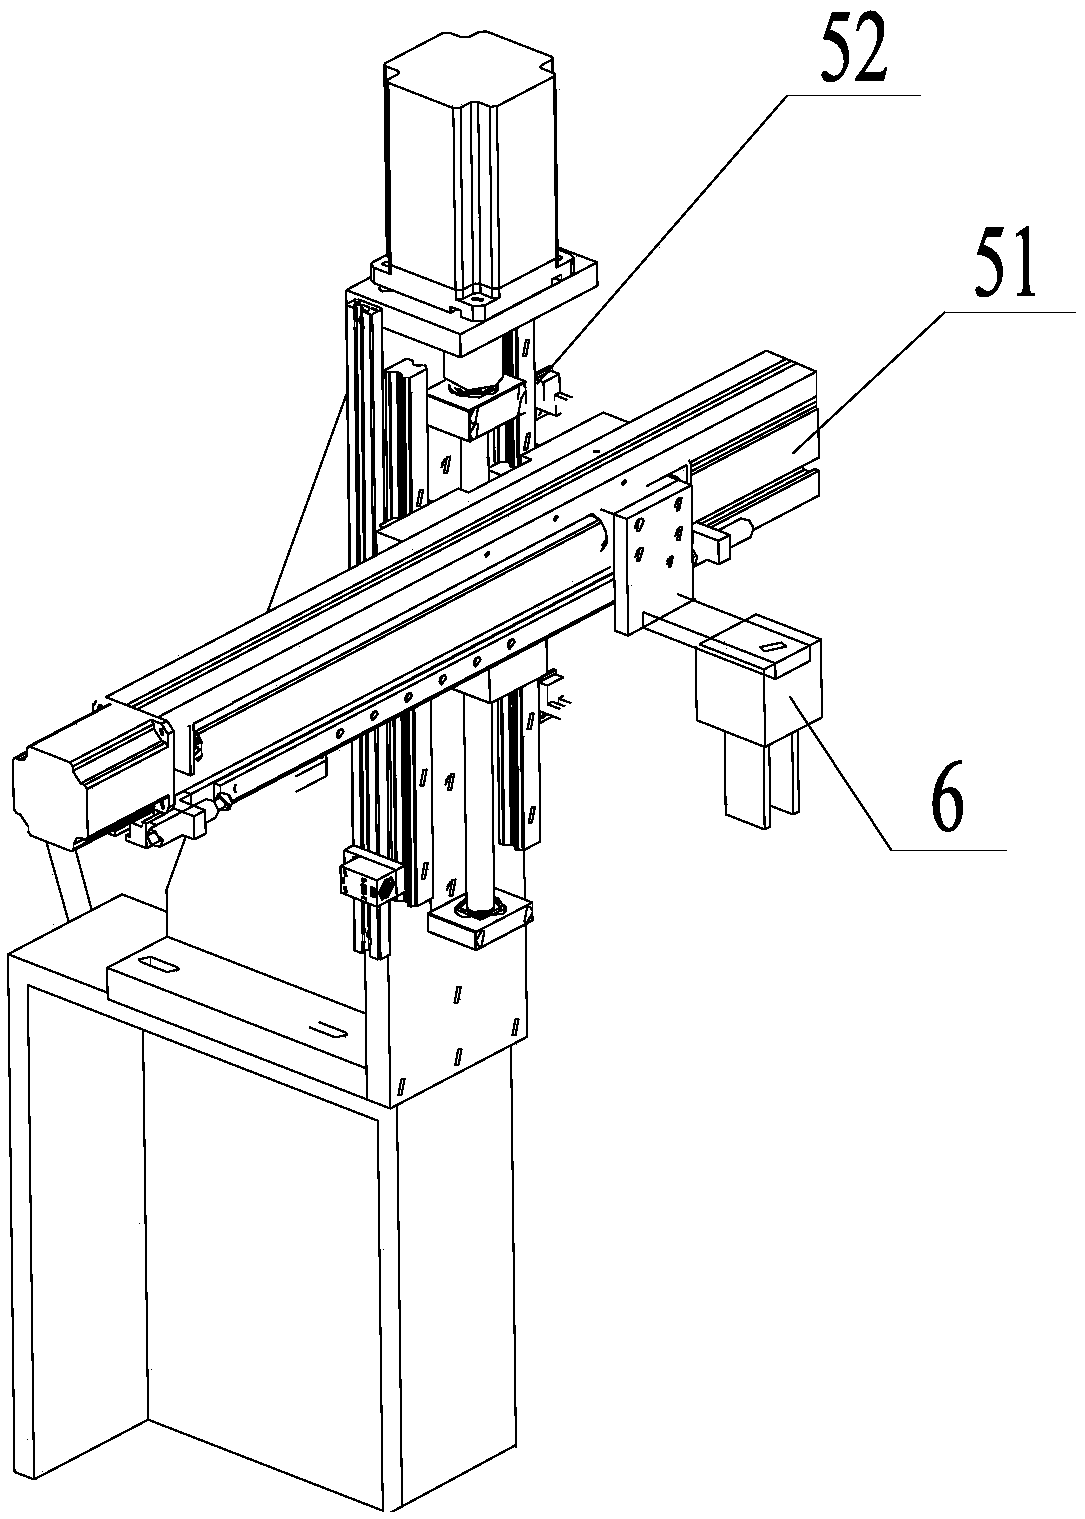 Device and method for feeding and pasting drying agents and humidity indicators to spools